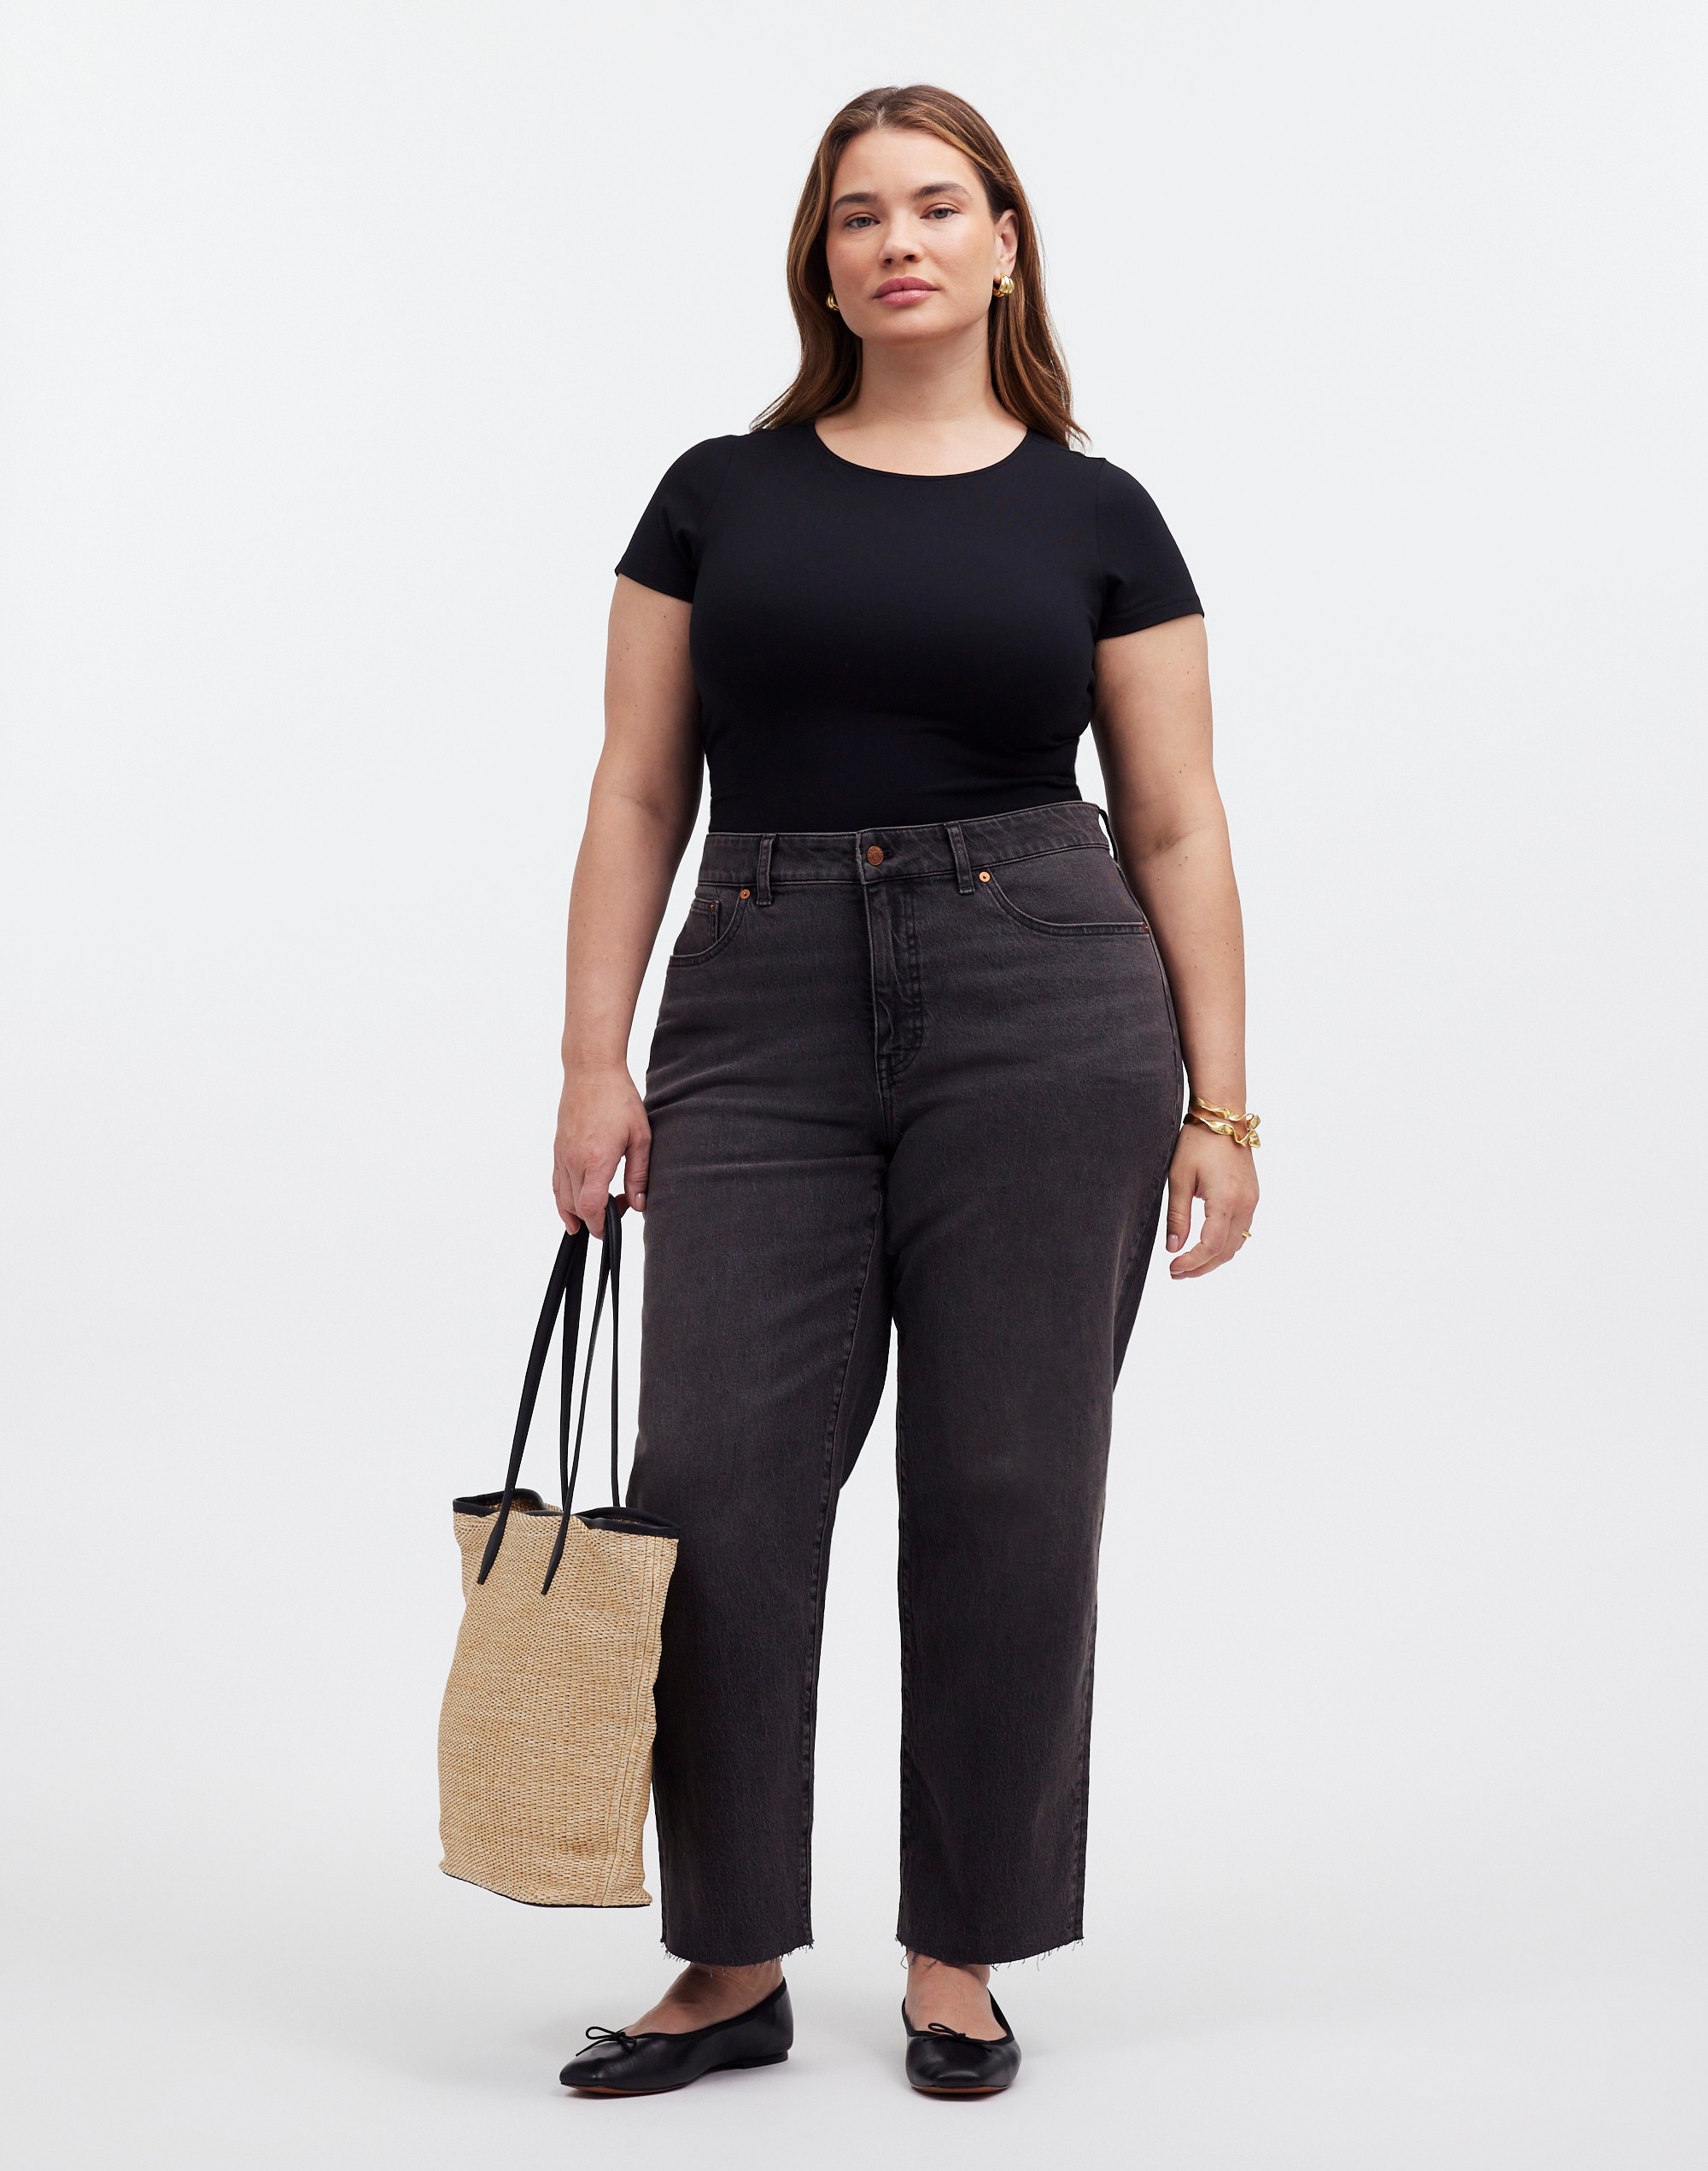 The Plus '90s Straight Crop Jean Washed Black